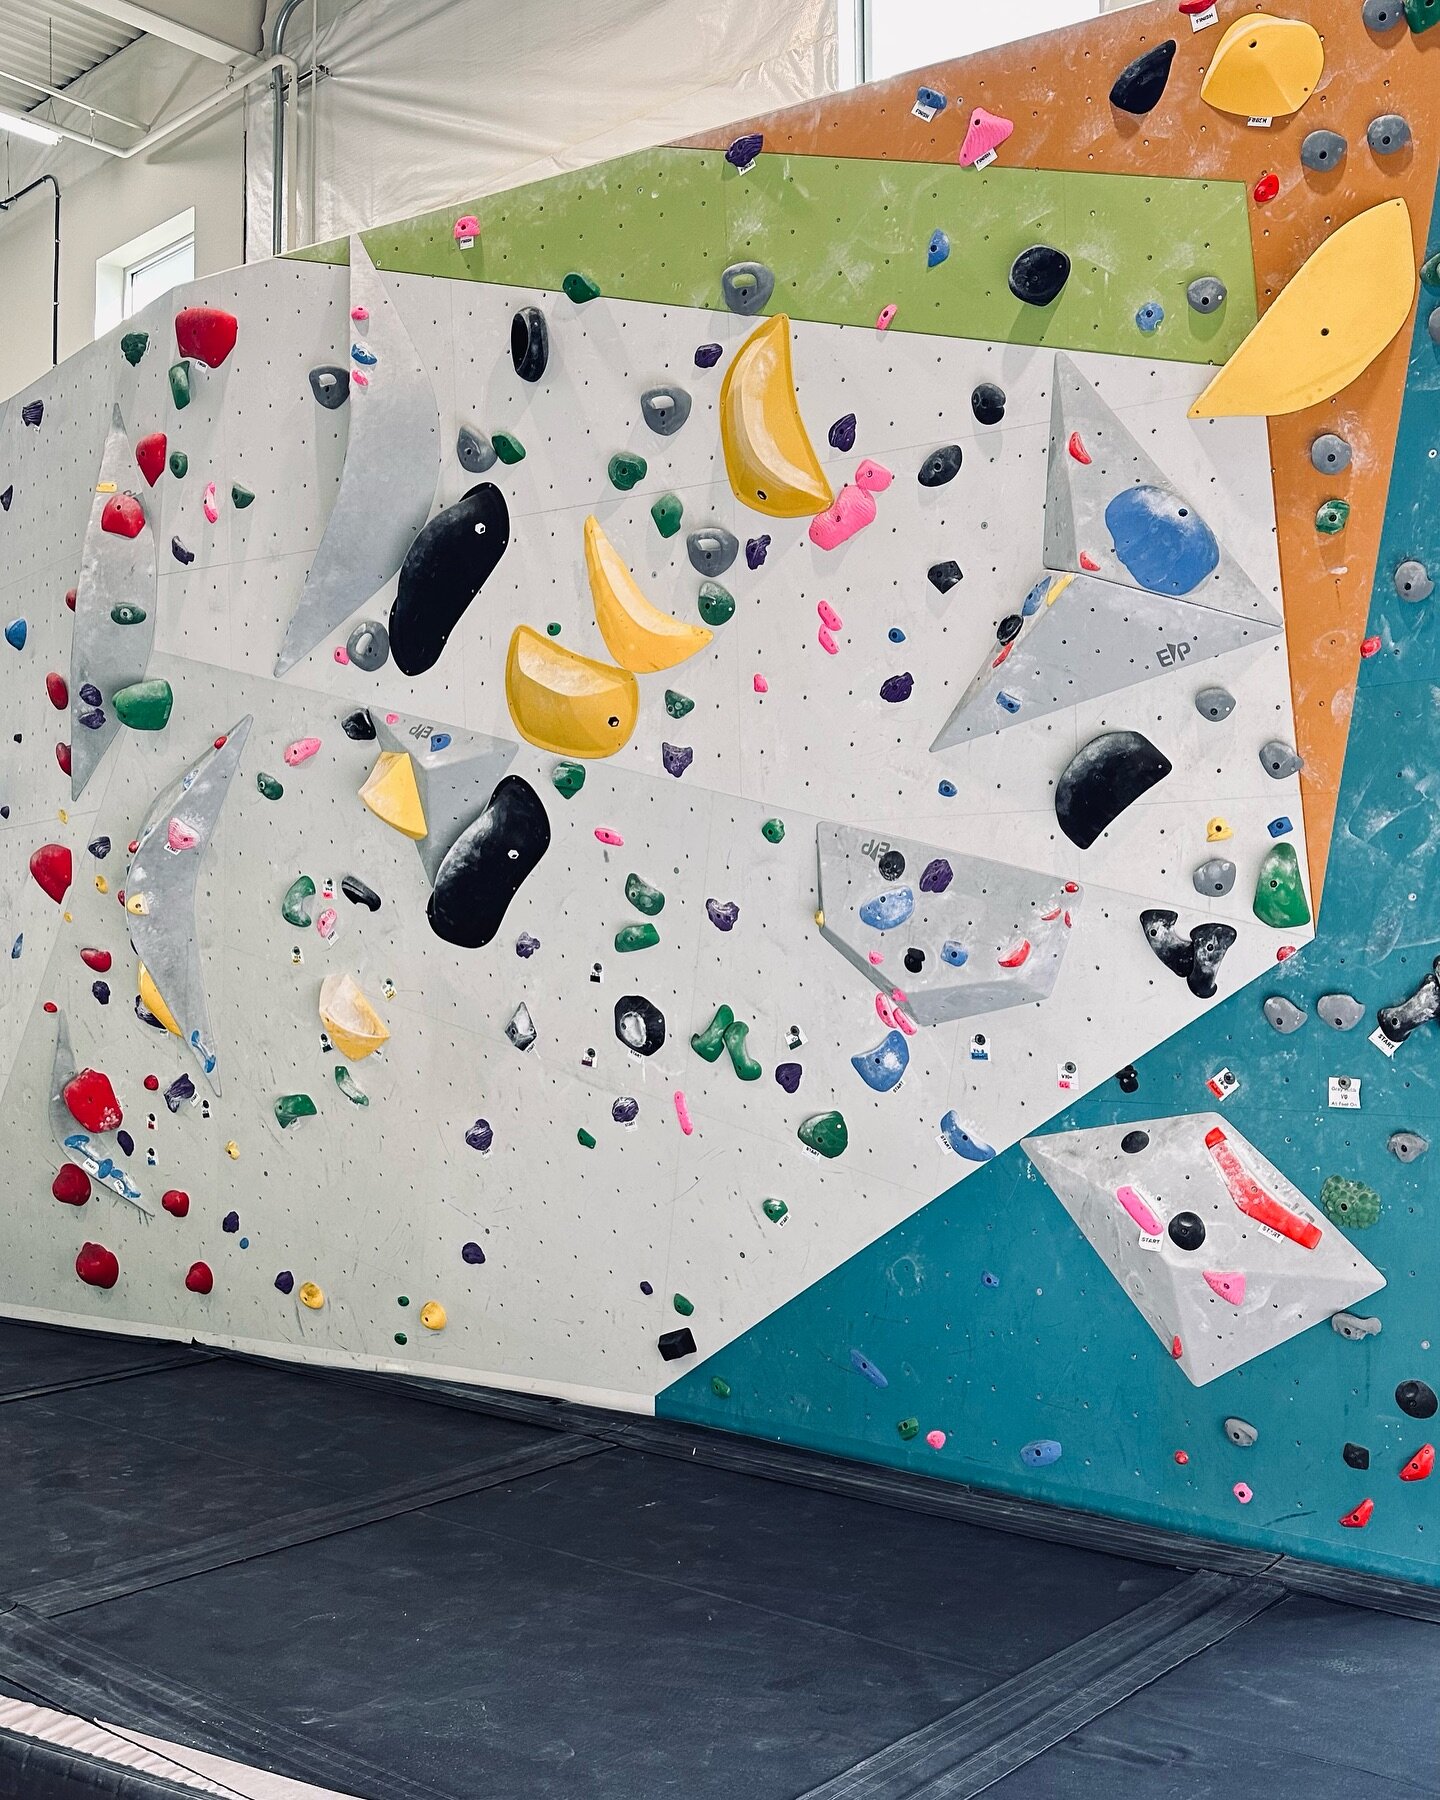 You may have noticed we set two walls last week! That&rsquo;s because our setters are heading off on a trip to gain inspiration! New routes will be going up the week of the 14th!